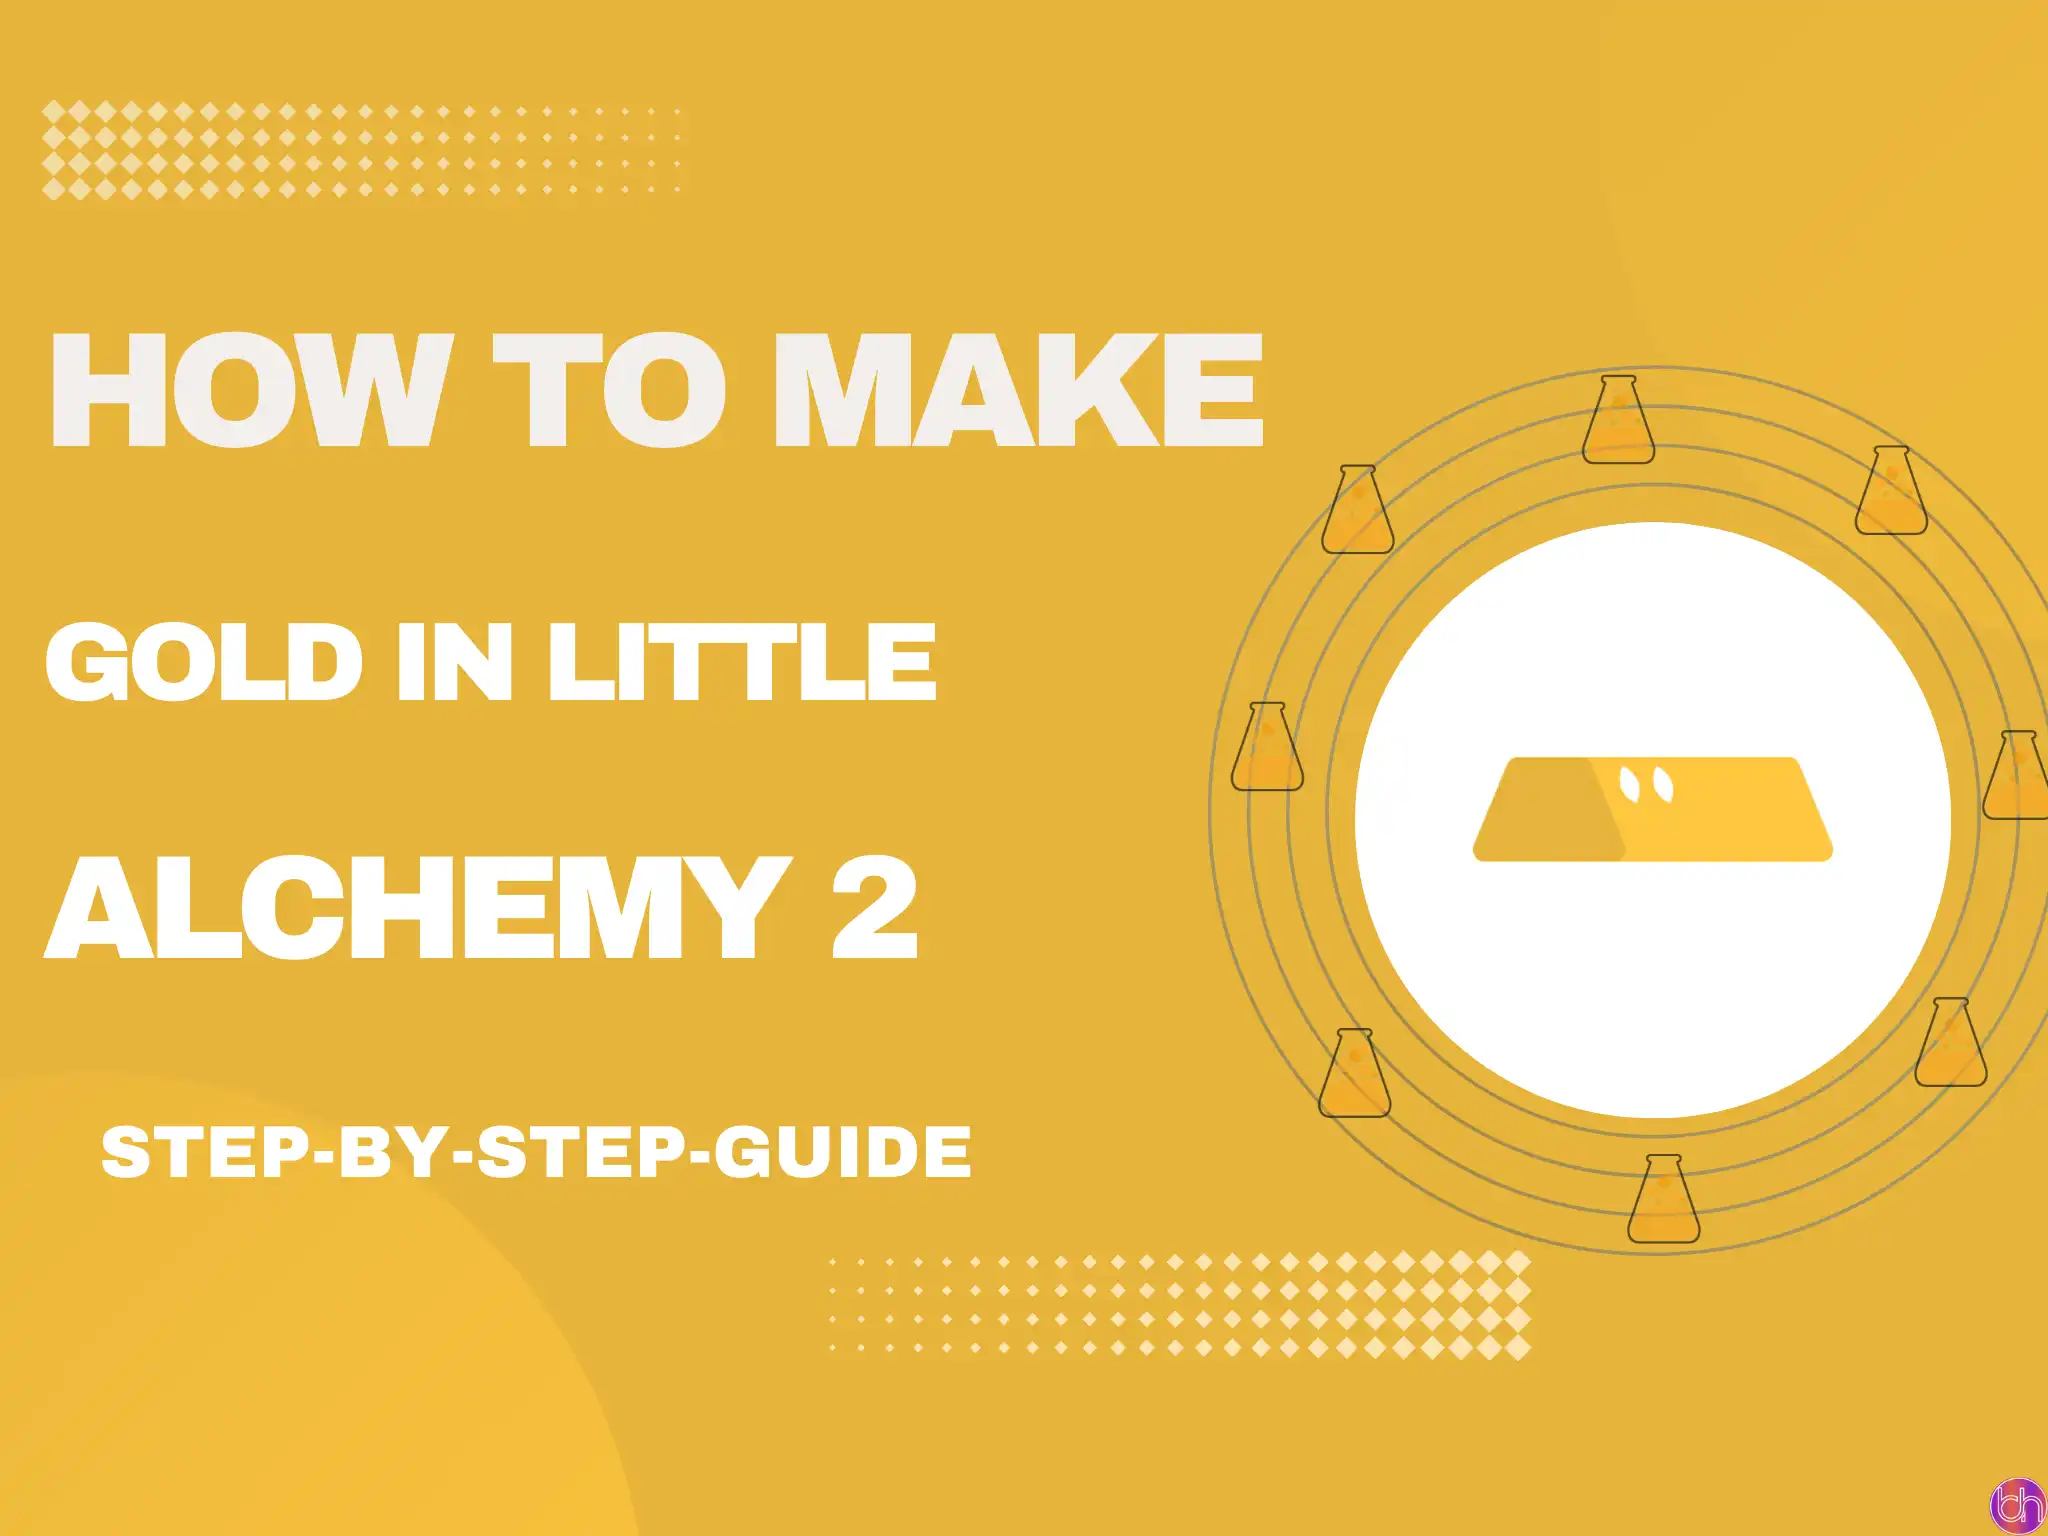 How to make Gold in Little Alchemy 2